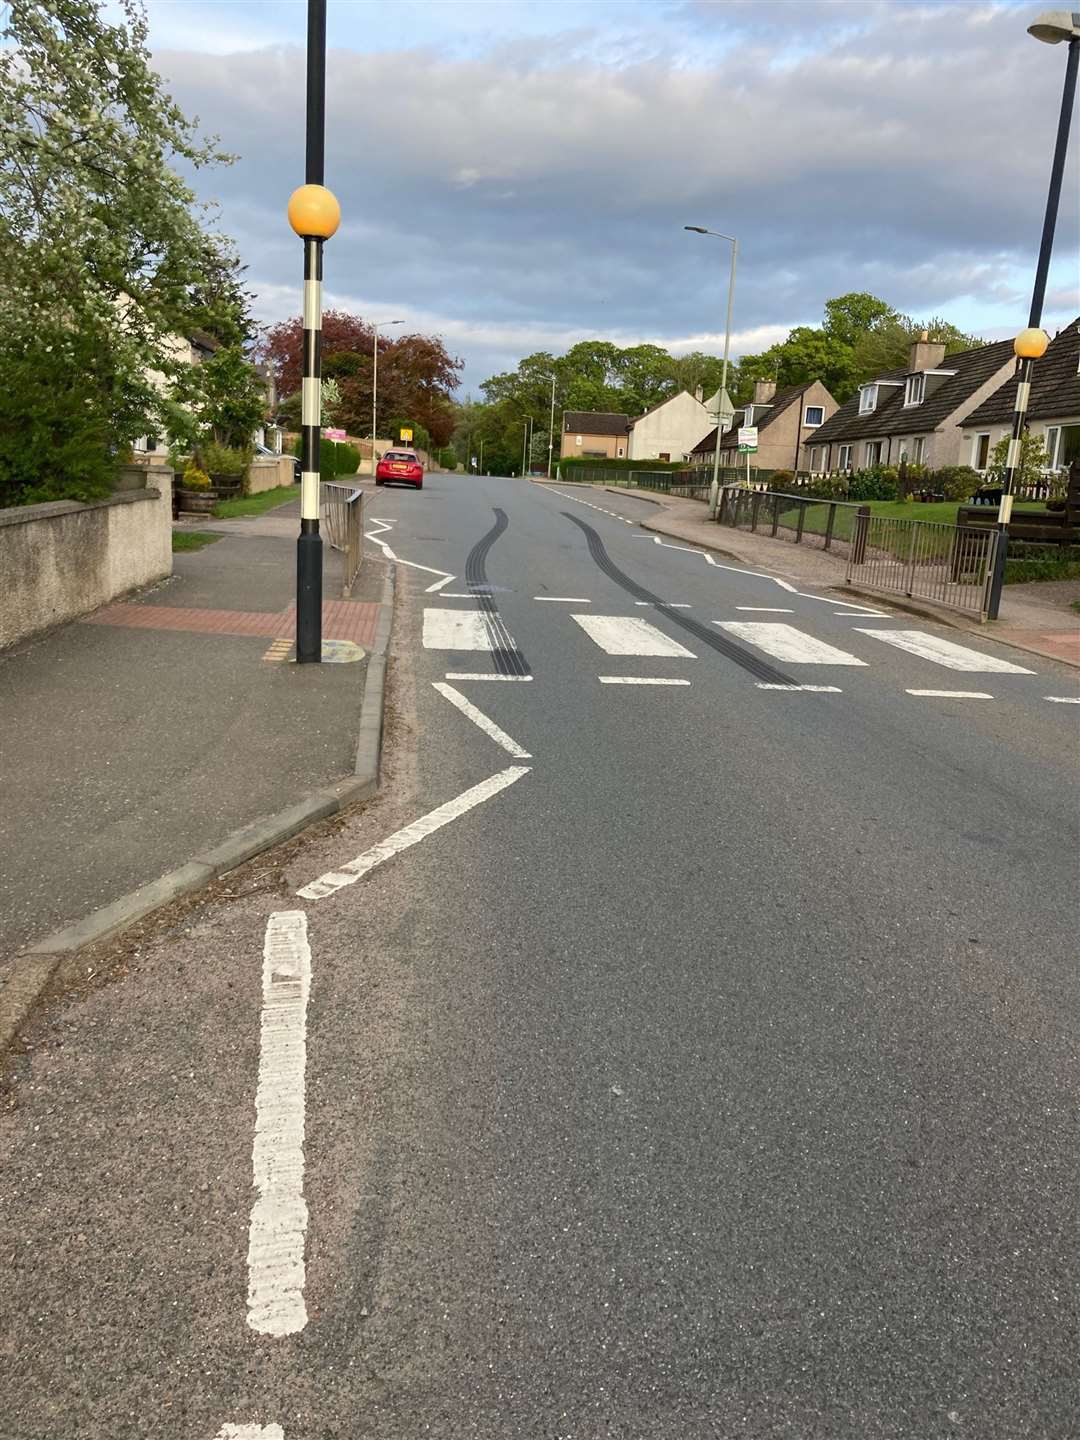 Parents are worried of vehicles not stopping at the Zebra crossing near the school in Auldearn.